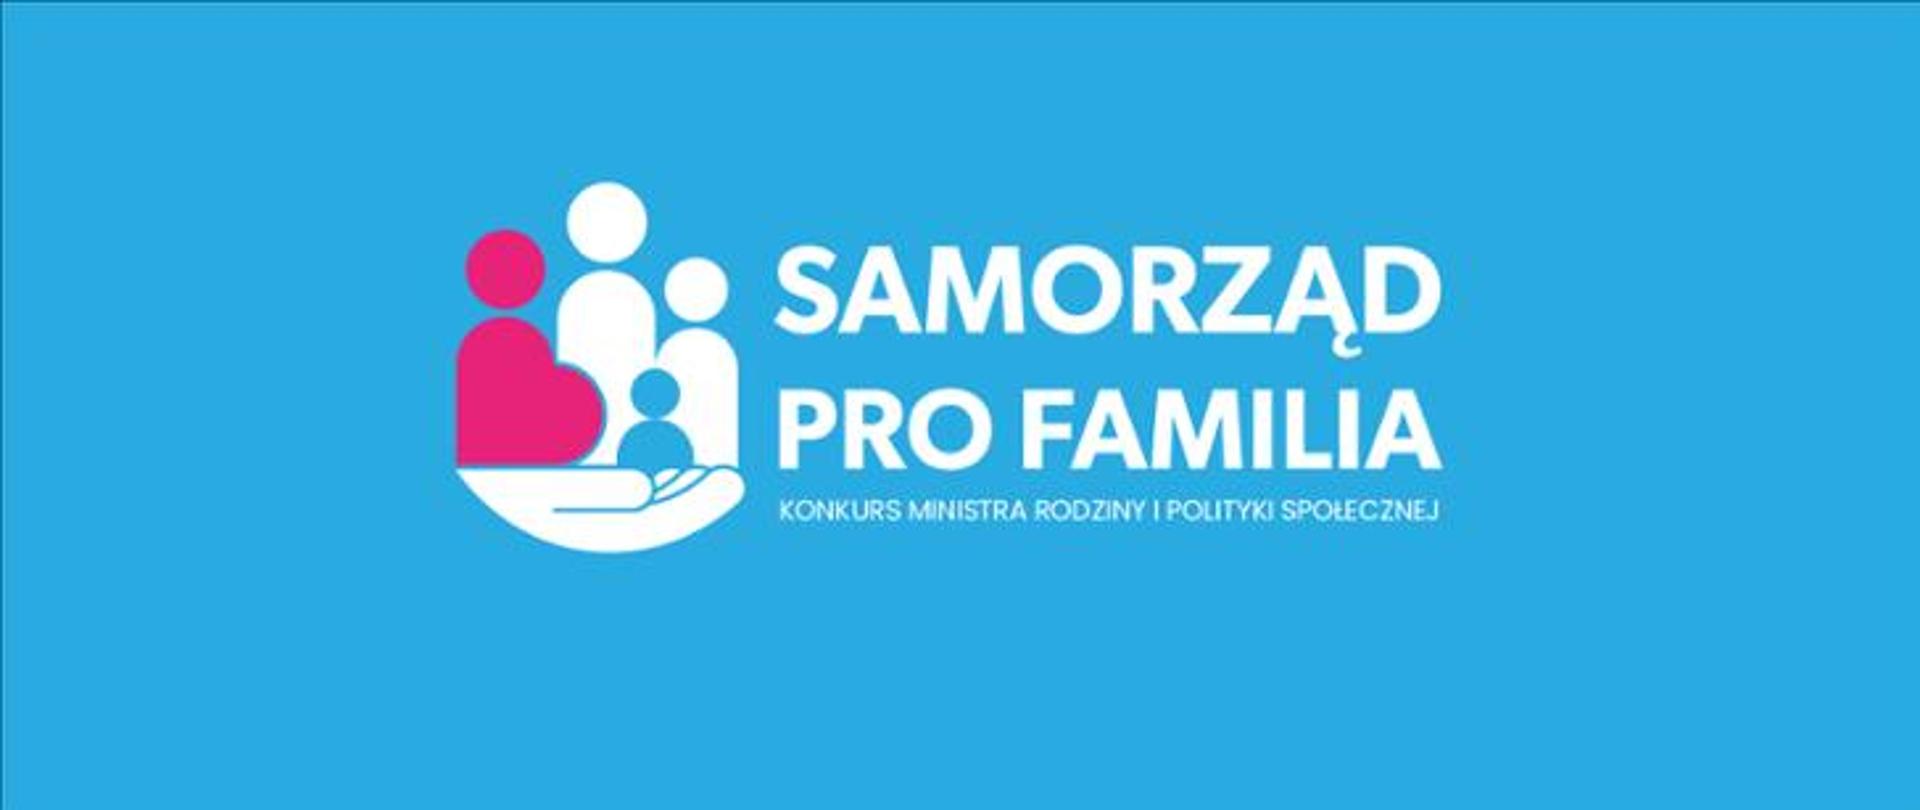 Ministry will award municipalities for pro-family policy. PRO FAMILIA local government competition launched